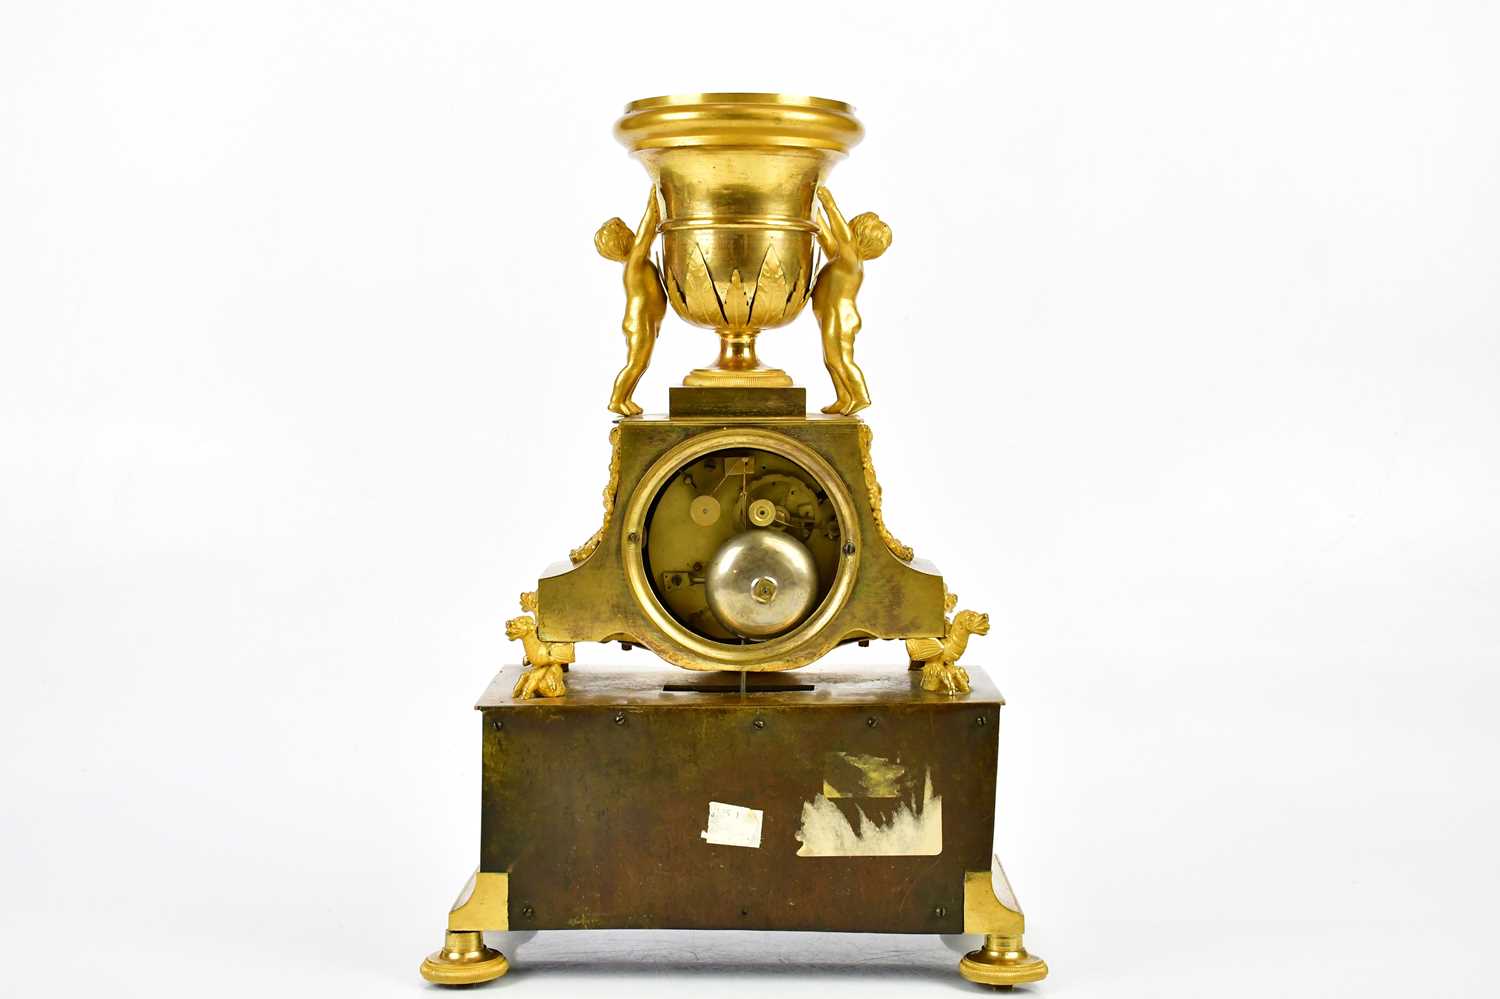 A late 19th century French ormolu mantel clock with cherubs supporting an urn finial above the - Image 6 of 7